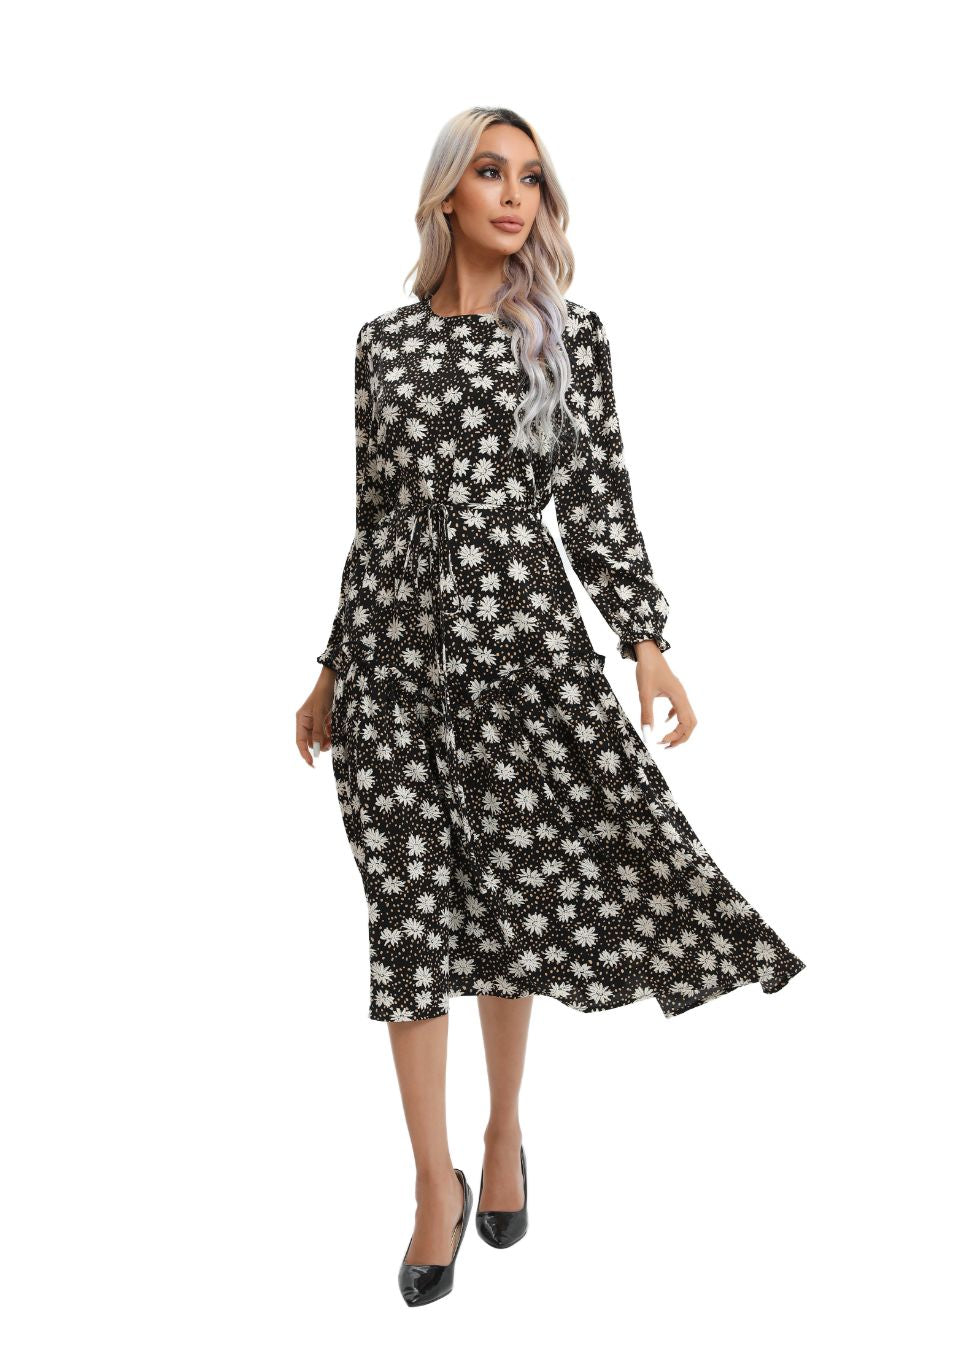 Modest Floral Midi Dress with Light Front Tie - seilerlanguageservices